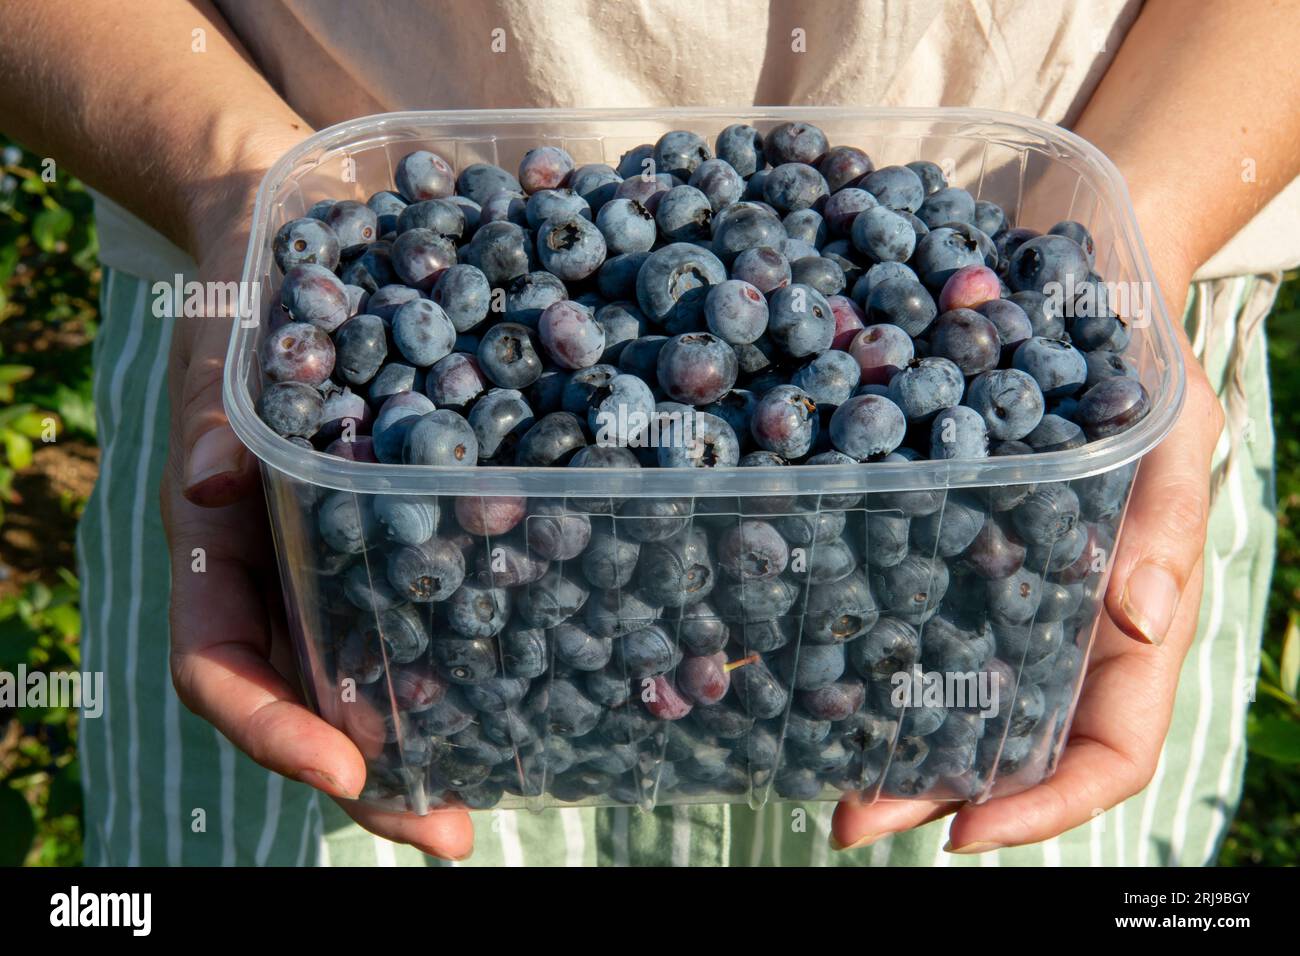 Woman holding European blueberry (Vaccinium myrtillus) in her hands. Bilberry, blaeberry, wimberry, and whortleberry close up. Stock Photo